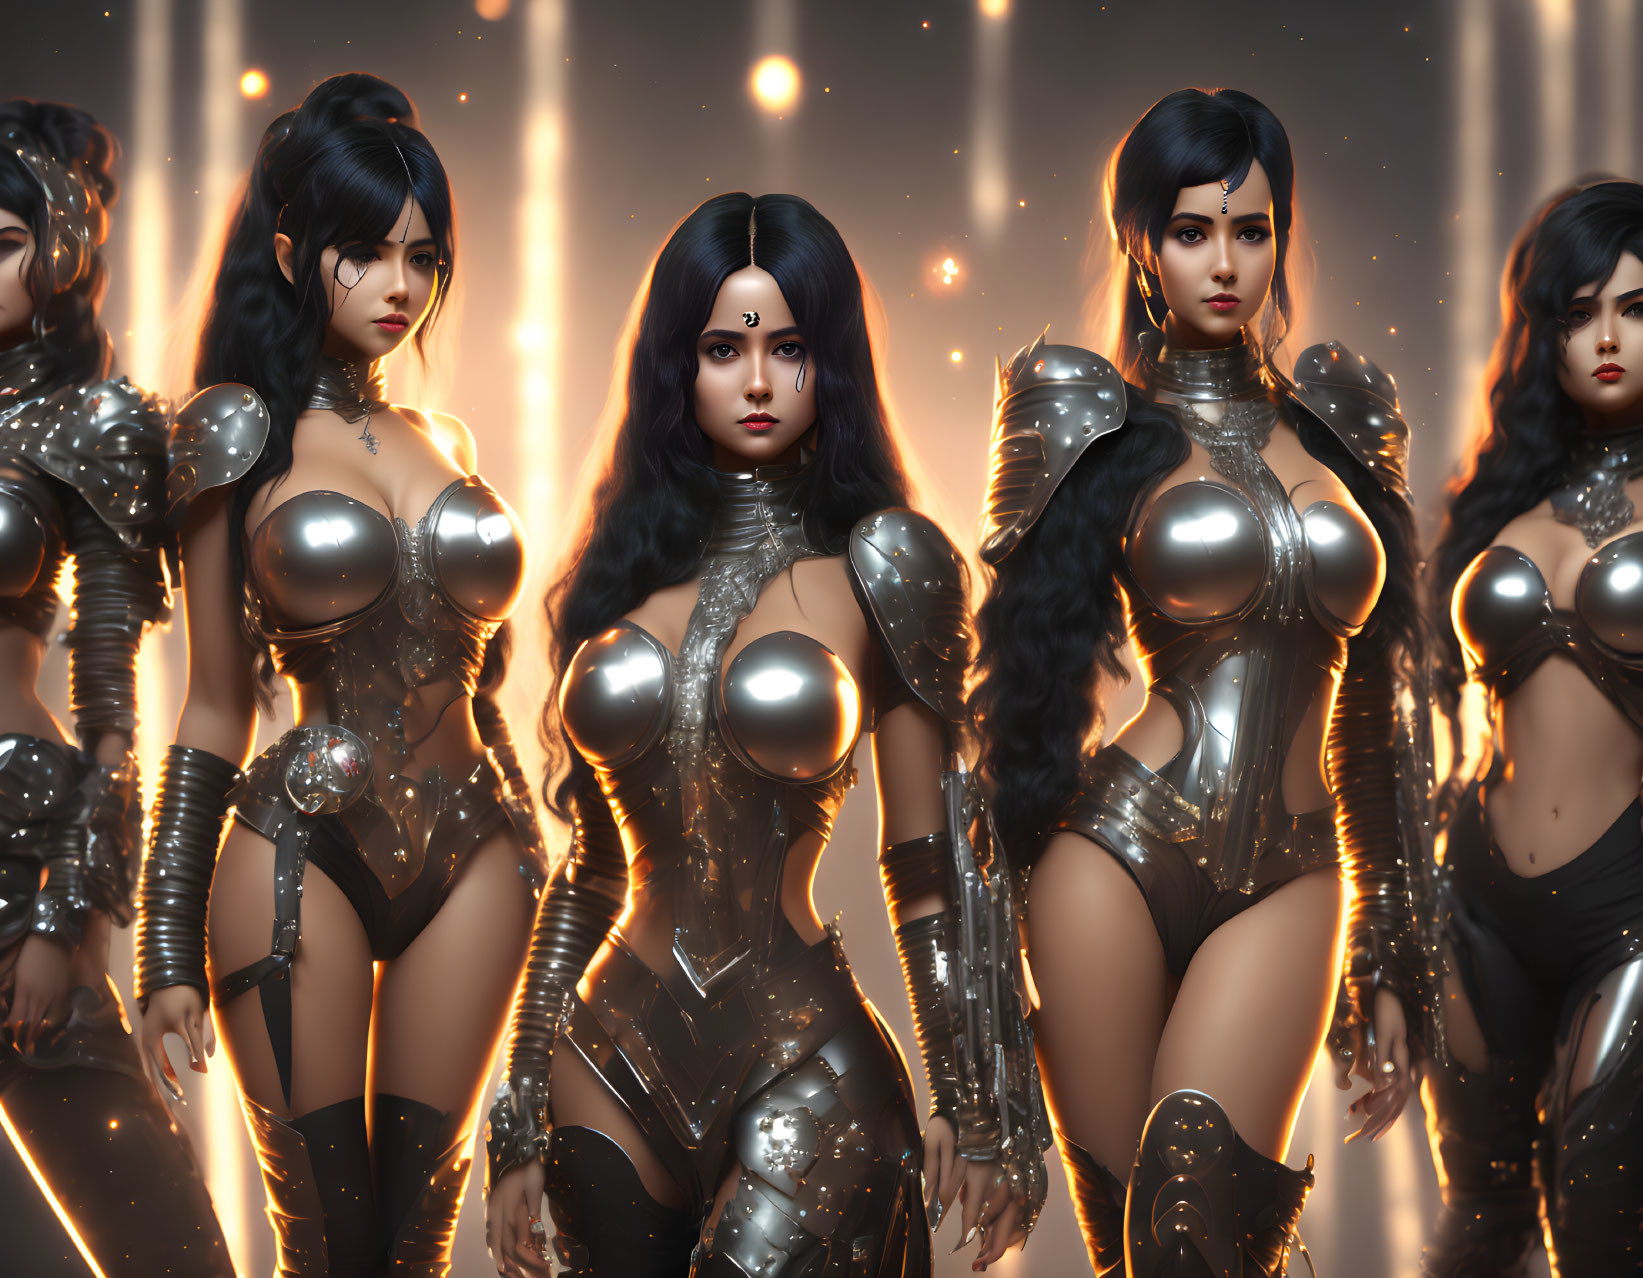 Five Female Warriors in Futuristic Silver Armor with Glowing Orange Lights